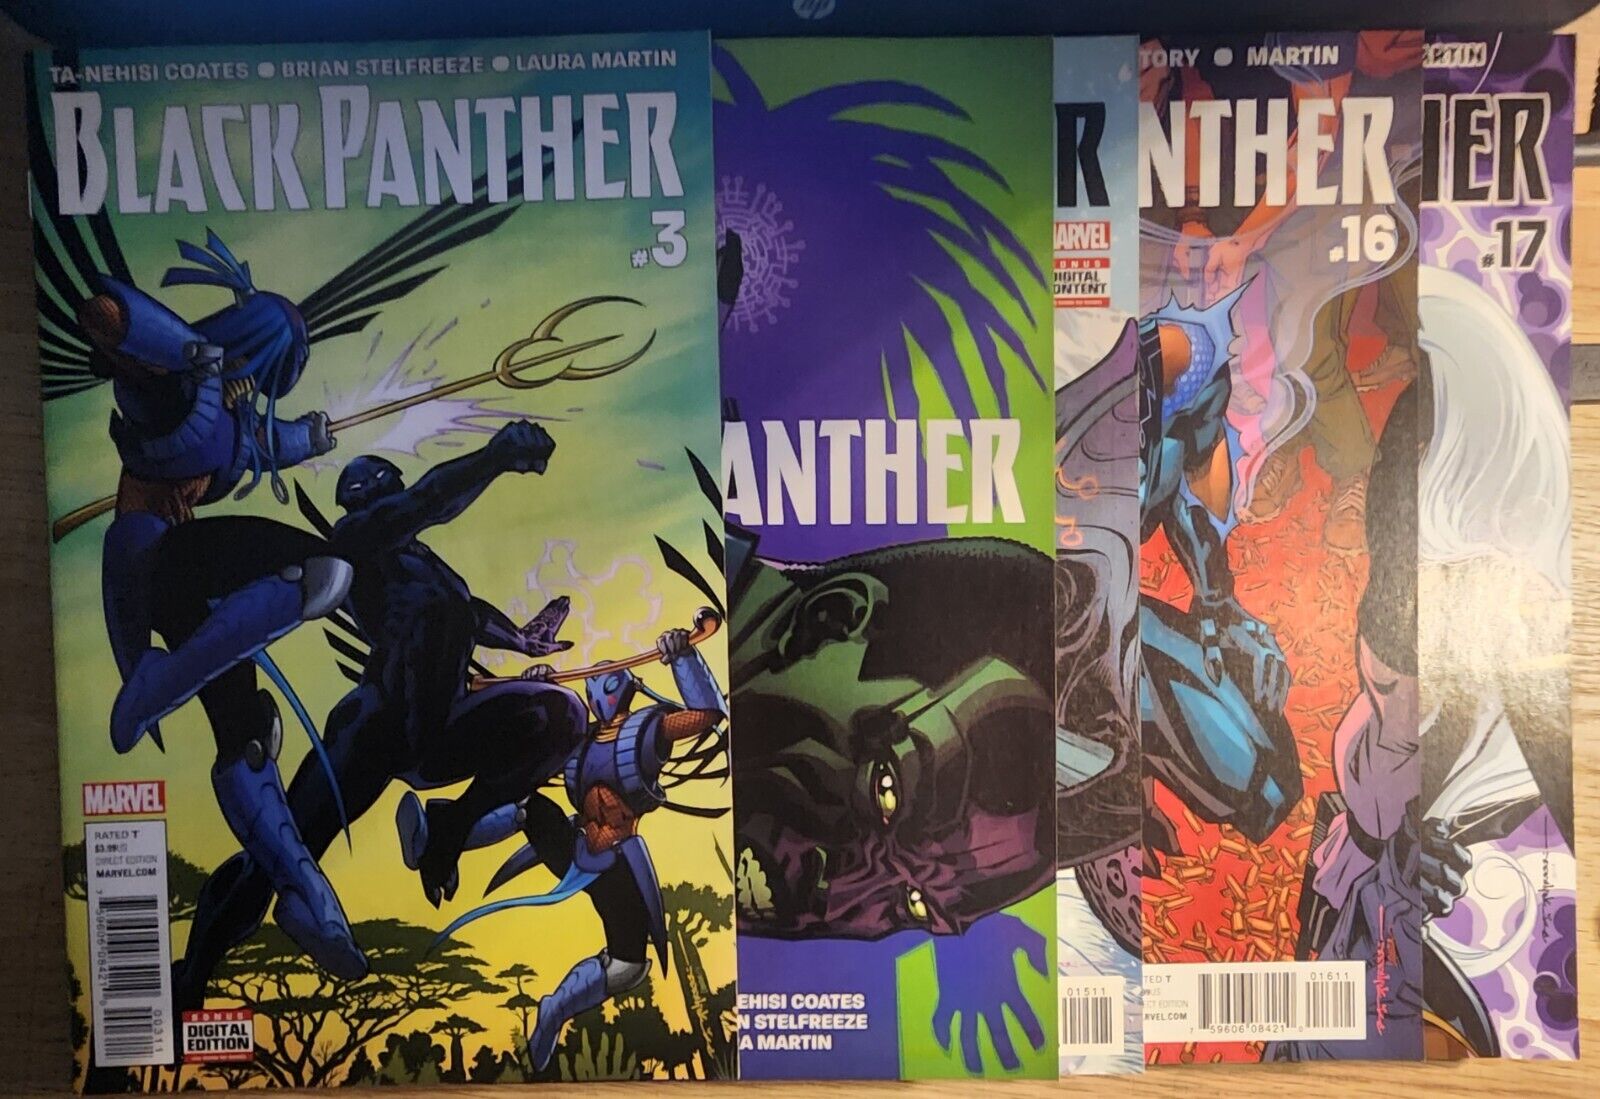 Black Panther 3 4 15 16 17  3 is 1St App Midnight Angels